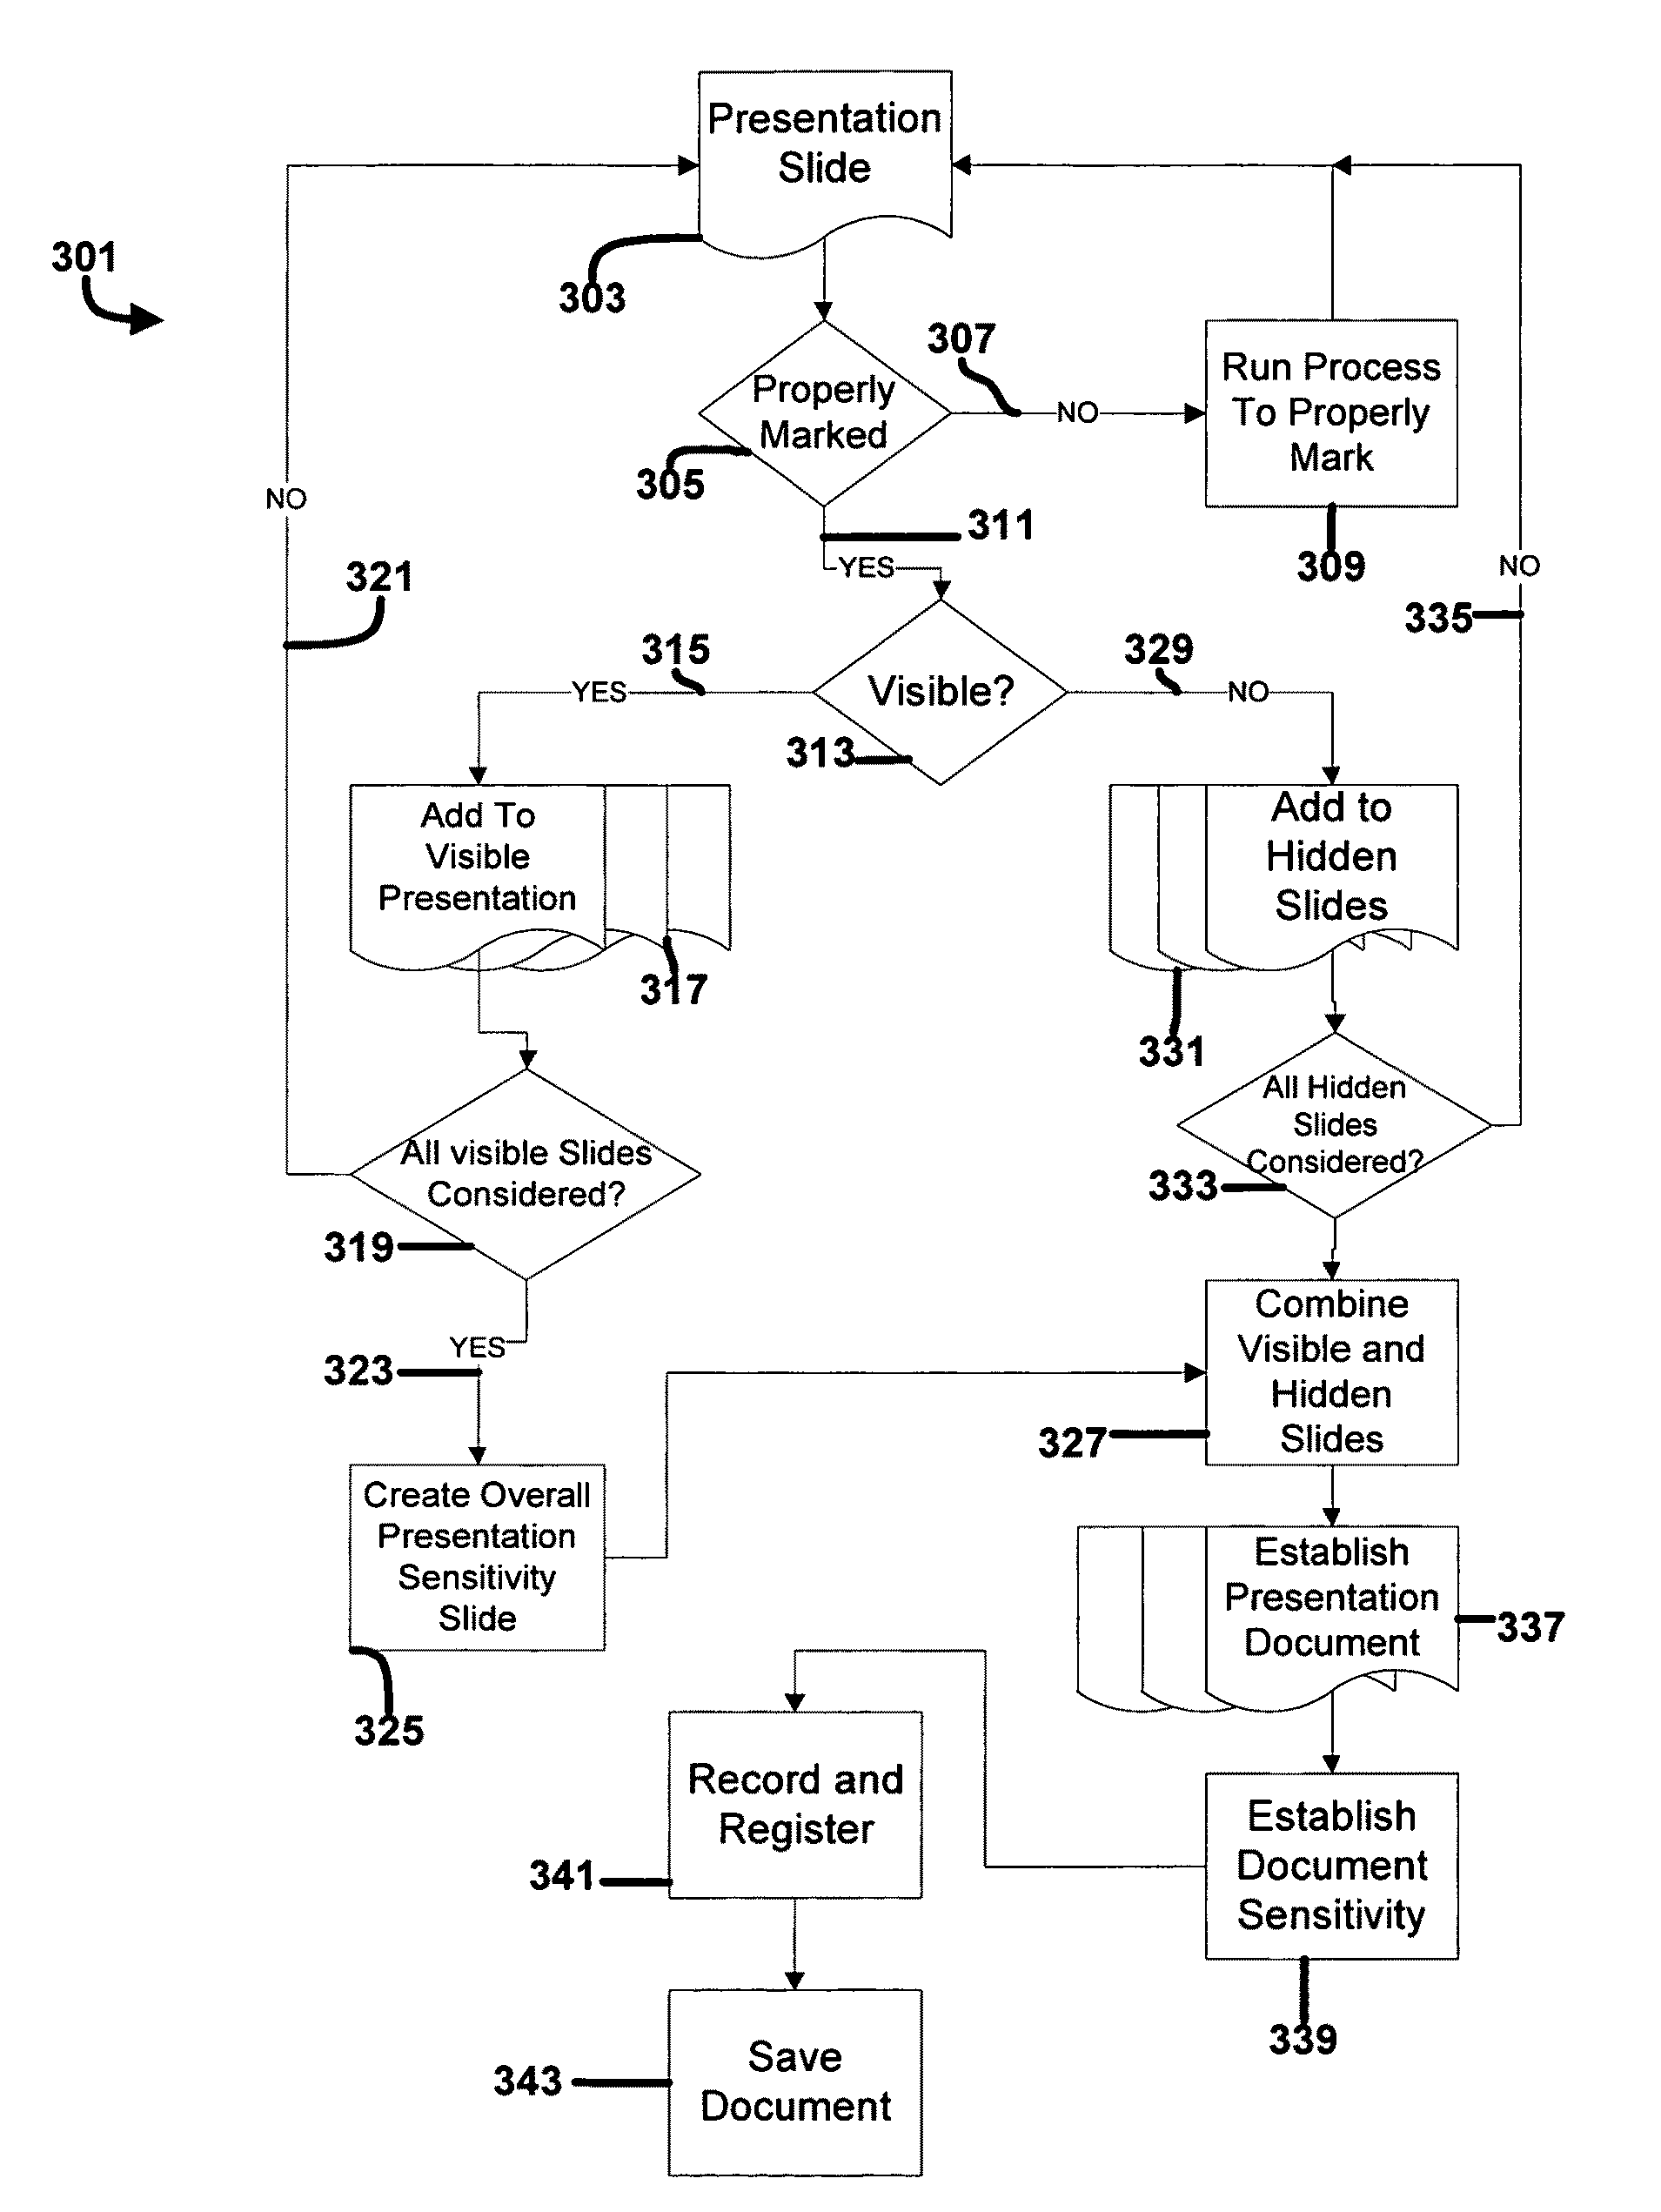 System or method to assist and automate an information security classification and marking process for government and non-government organizations for information of an electronic document